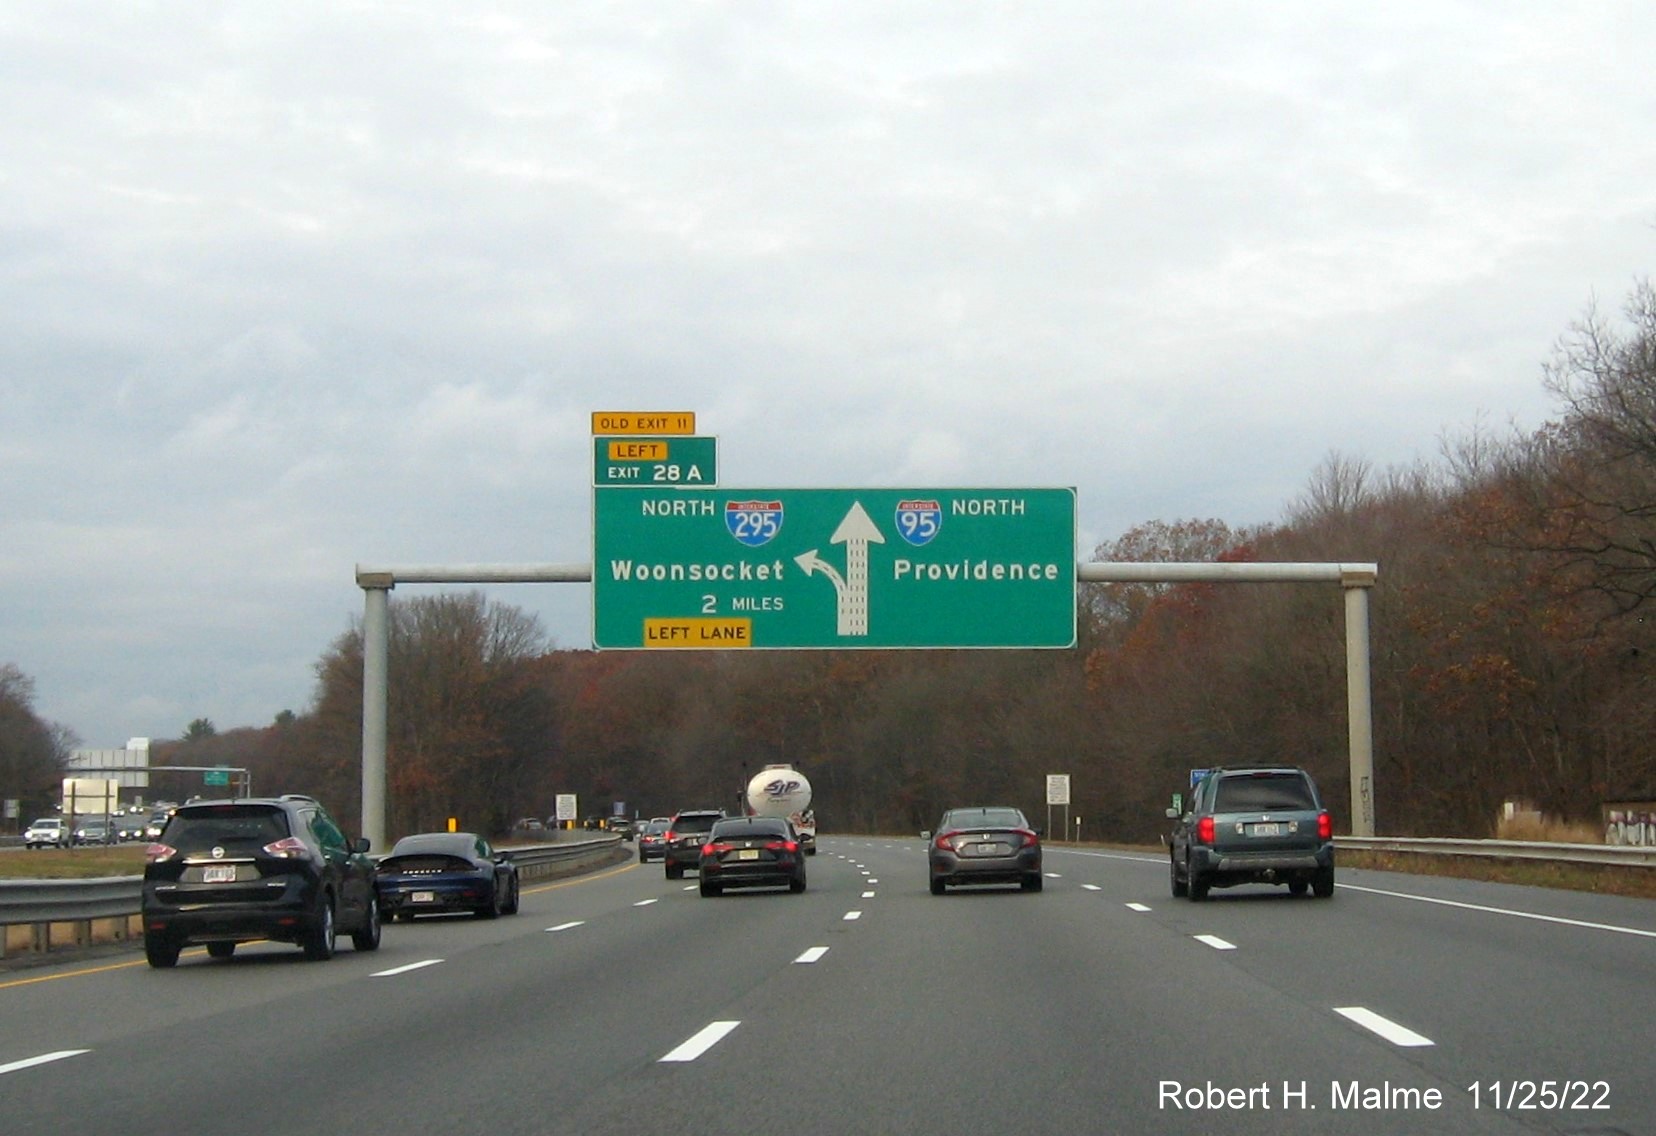 Image of overhead 2 miles advance diagrammatic sign for I-295 North exit with new milepost based exut number and yellow Old Exit 11 advisory sign above exit tab on I-95 North in Warwick, November 2022